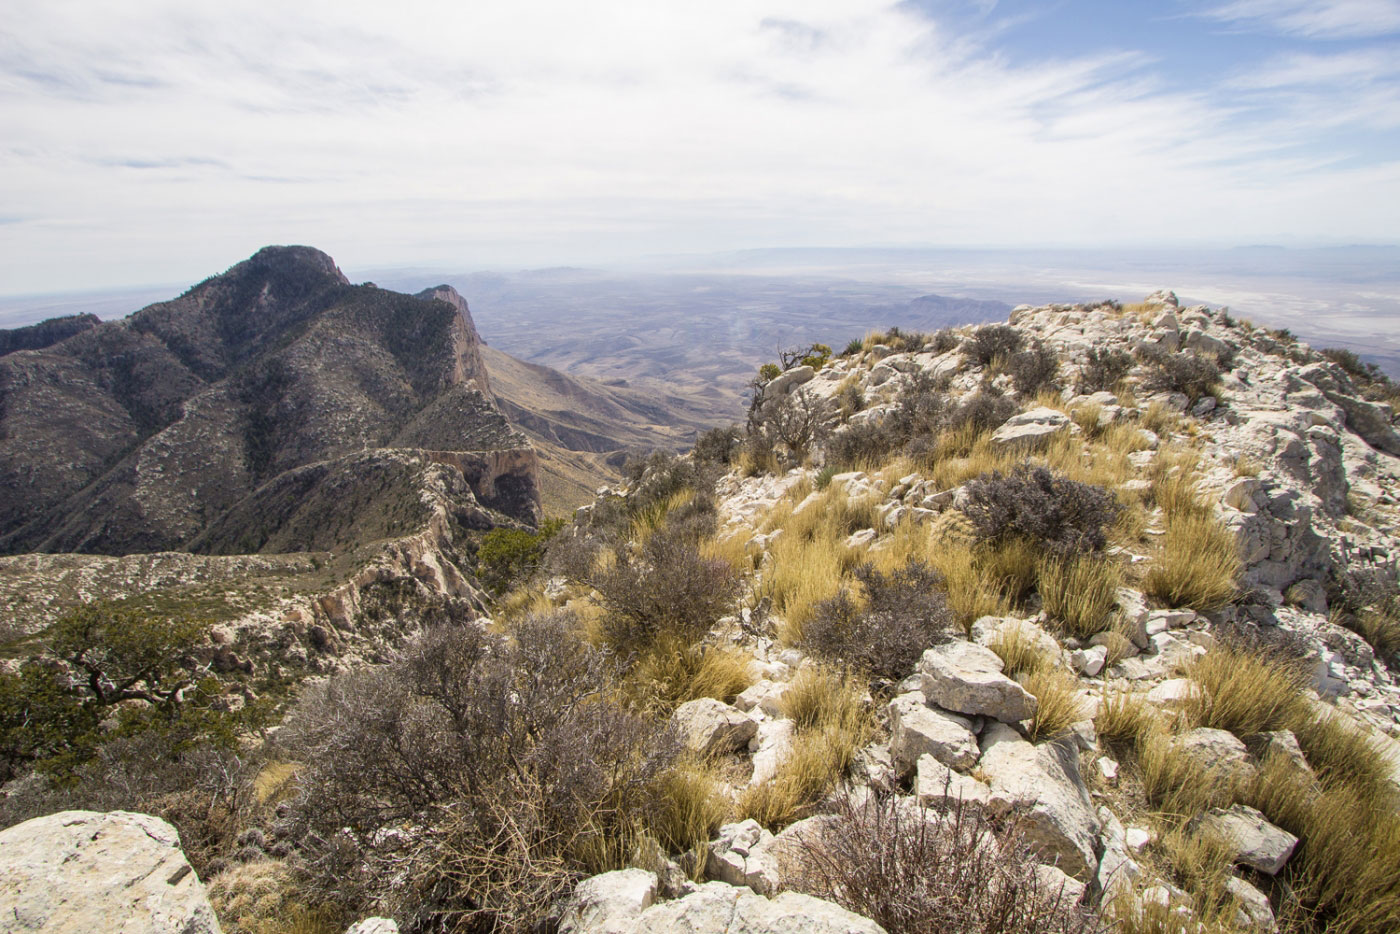 Hike Guadalupe, Shumard, Bartlett, Bush Loop in Guadalupe Mountains National Park, Texas - Stav is Lost